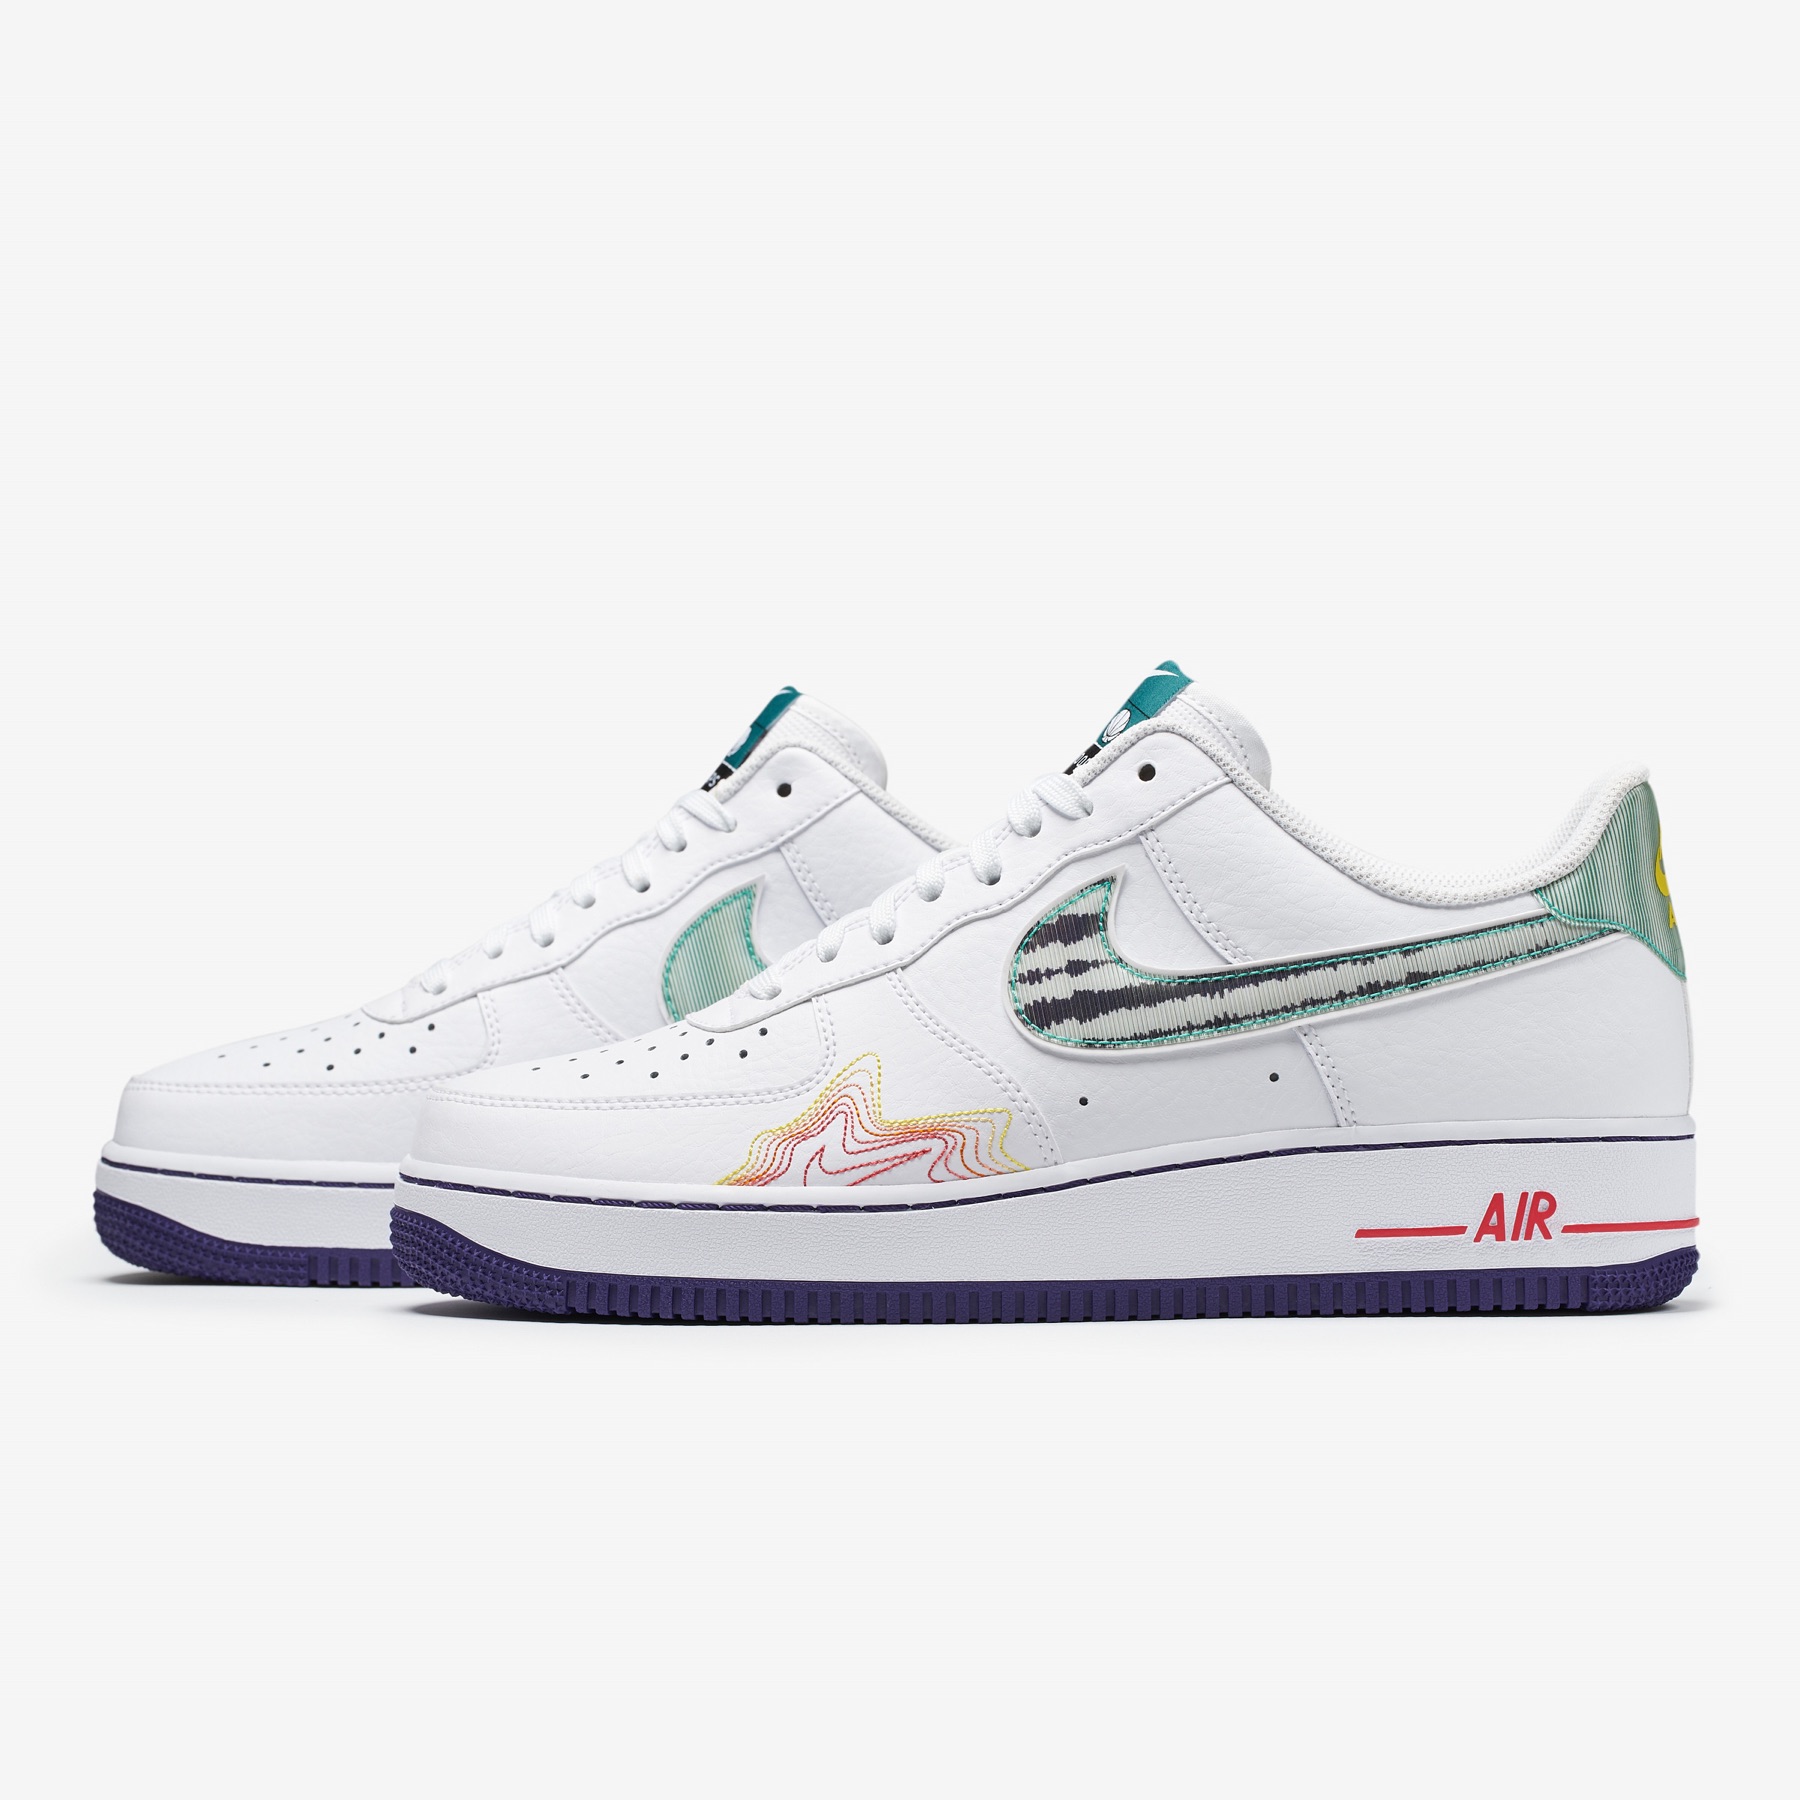 J23 iPhone App on Twitter: "Nike Air Force 1: Music (De'Aaron Fox and Brittney Griner) available on Foot Locker Link -&gt; https://t.co/K29aQRV0CI https://t.co/4rEqzhW14G" / Twitter